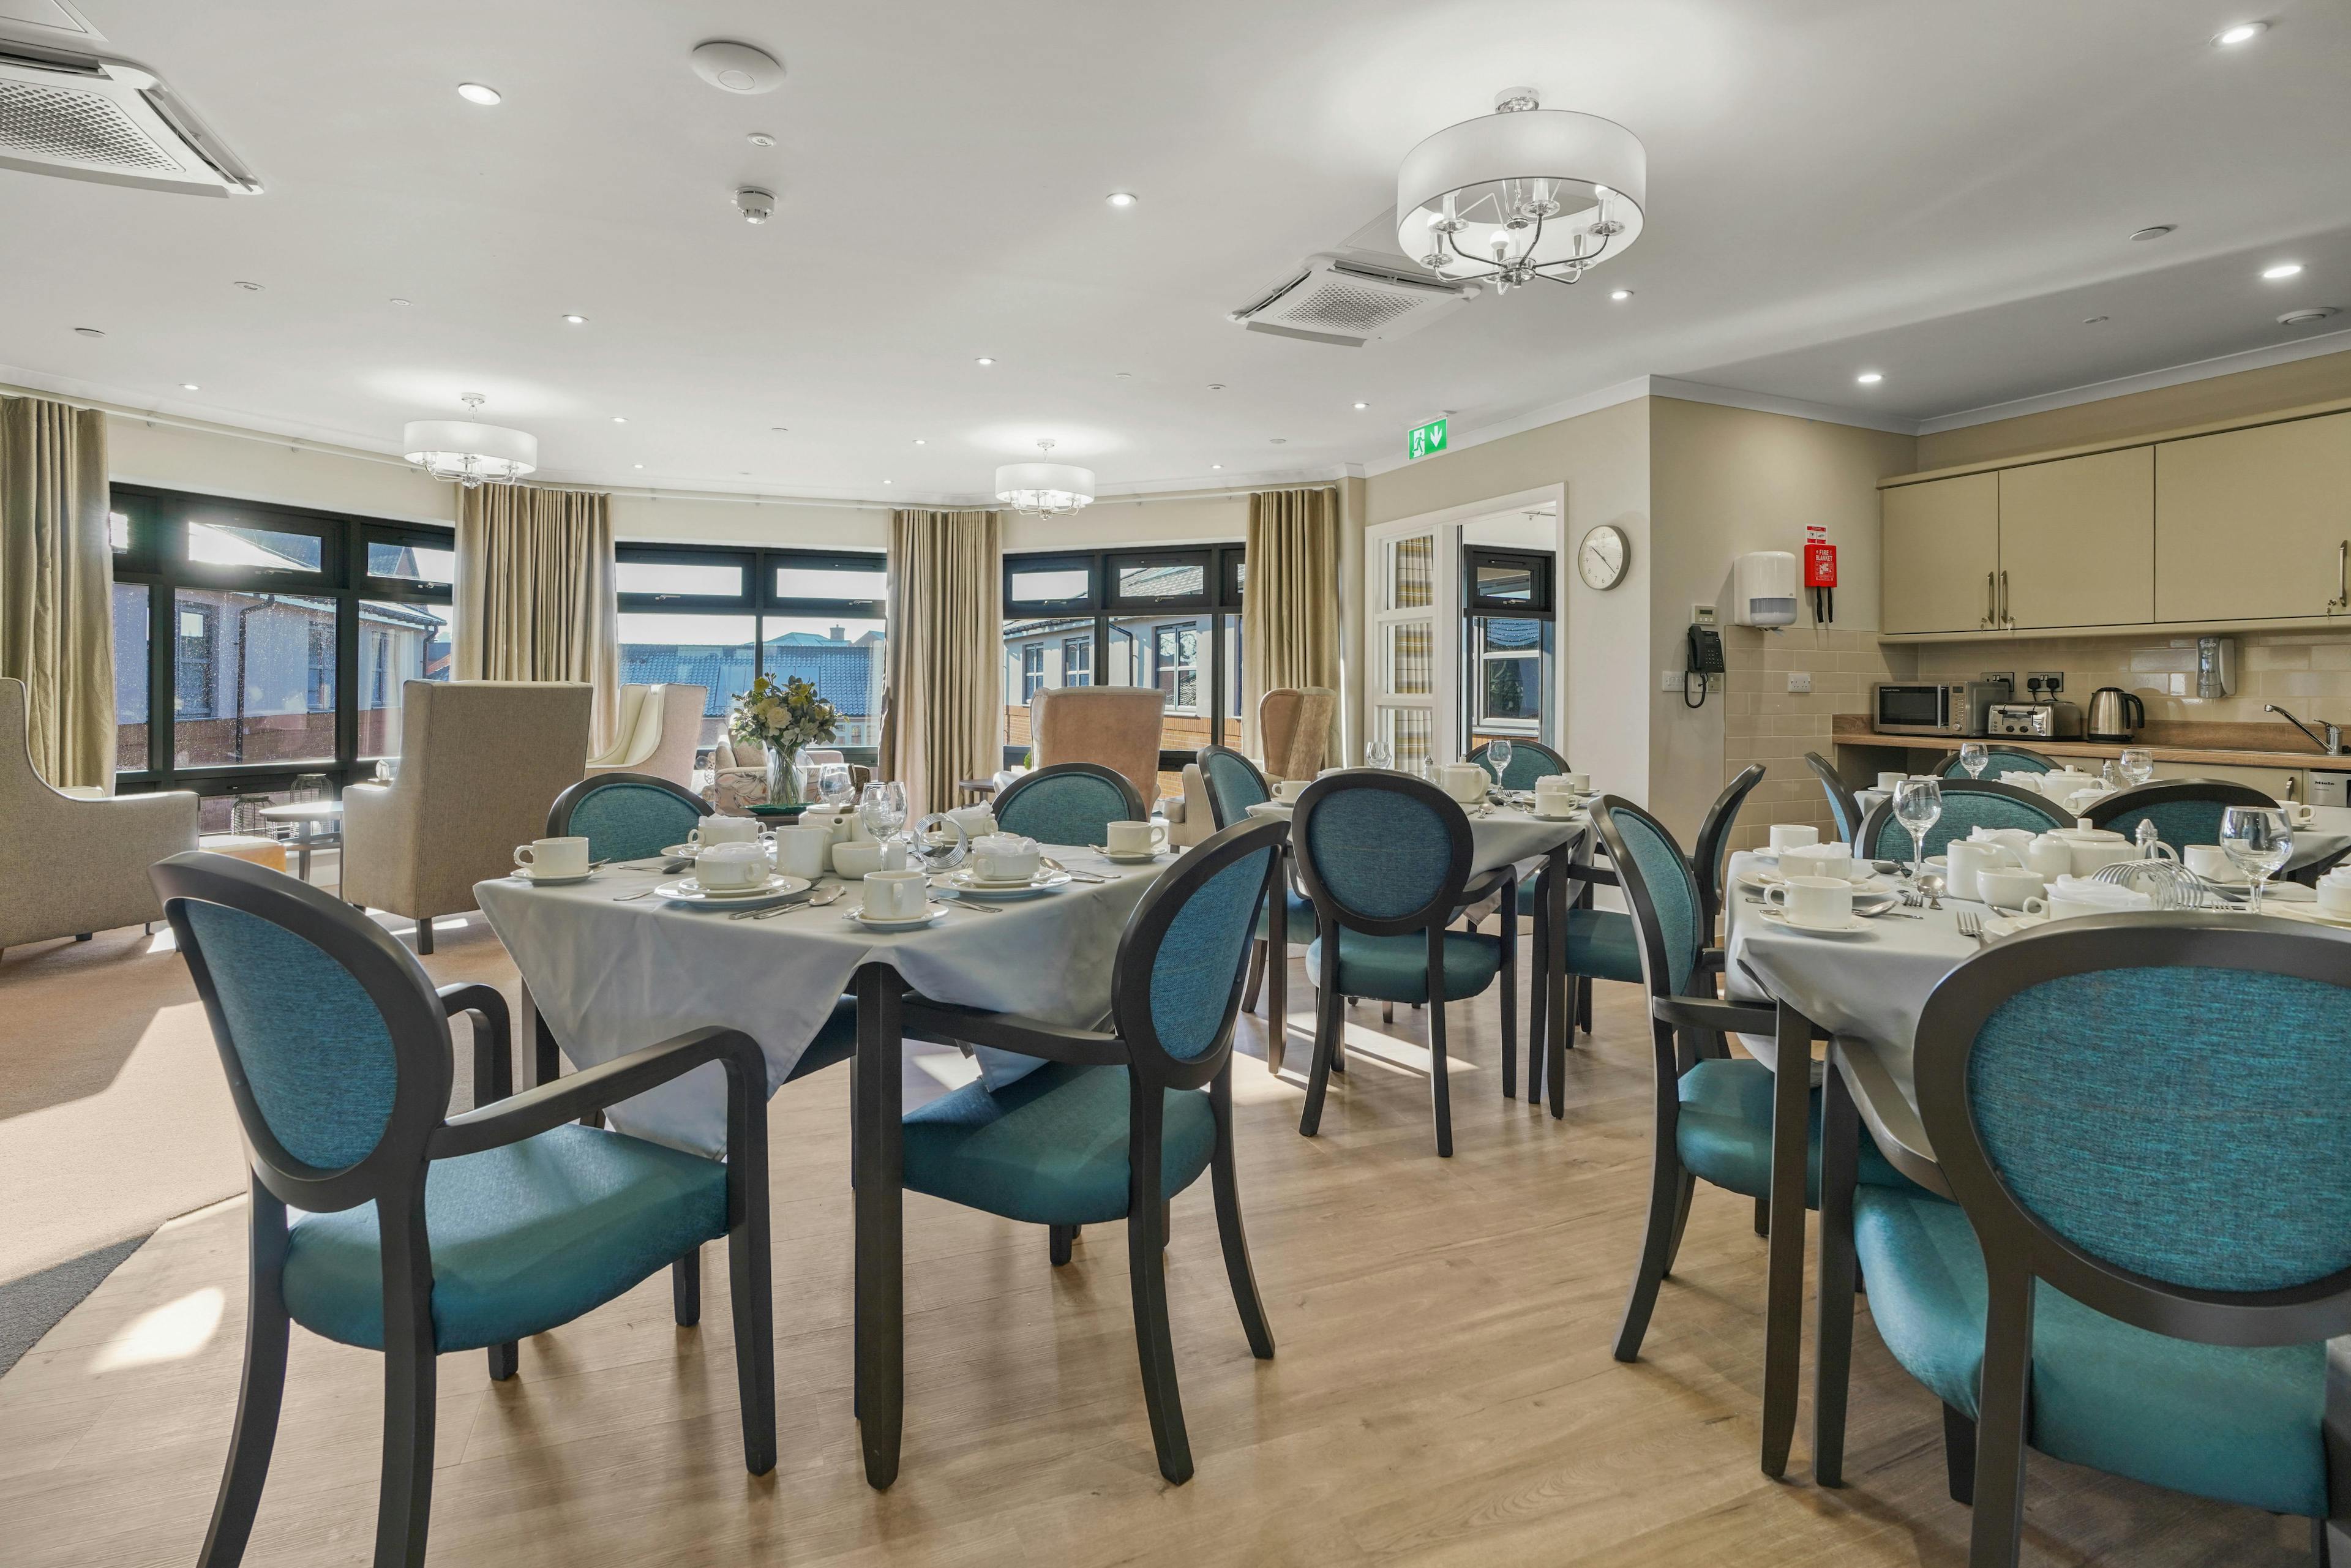 Dining room of Holbeach Meadow care home in Holbeach, Lincolnshire